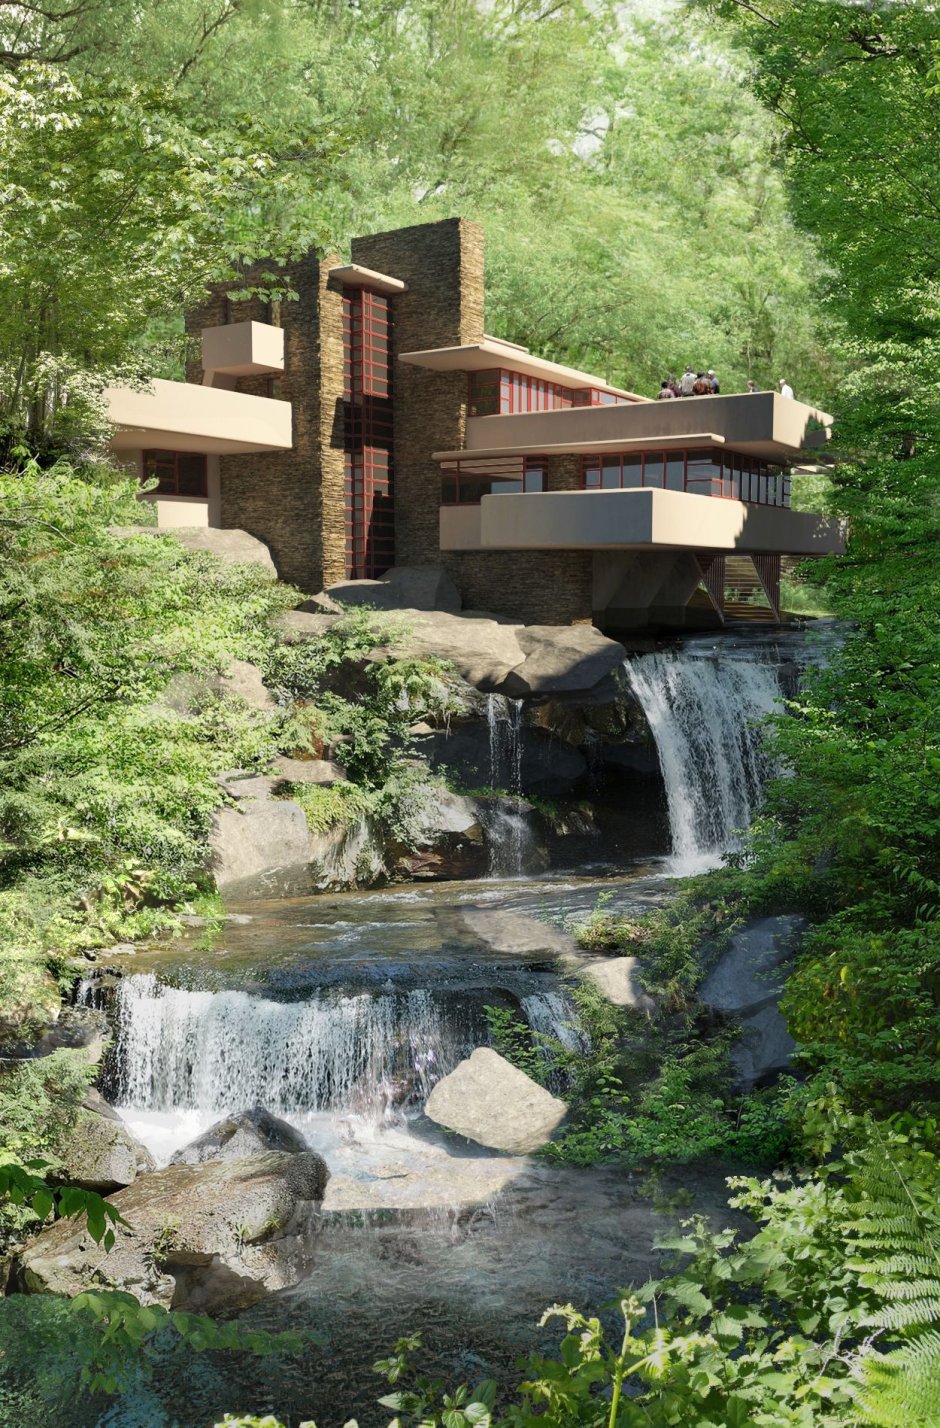 House at the waterfall Wright Wright